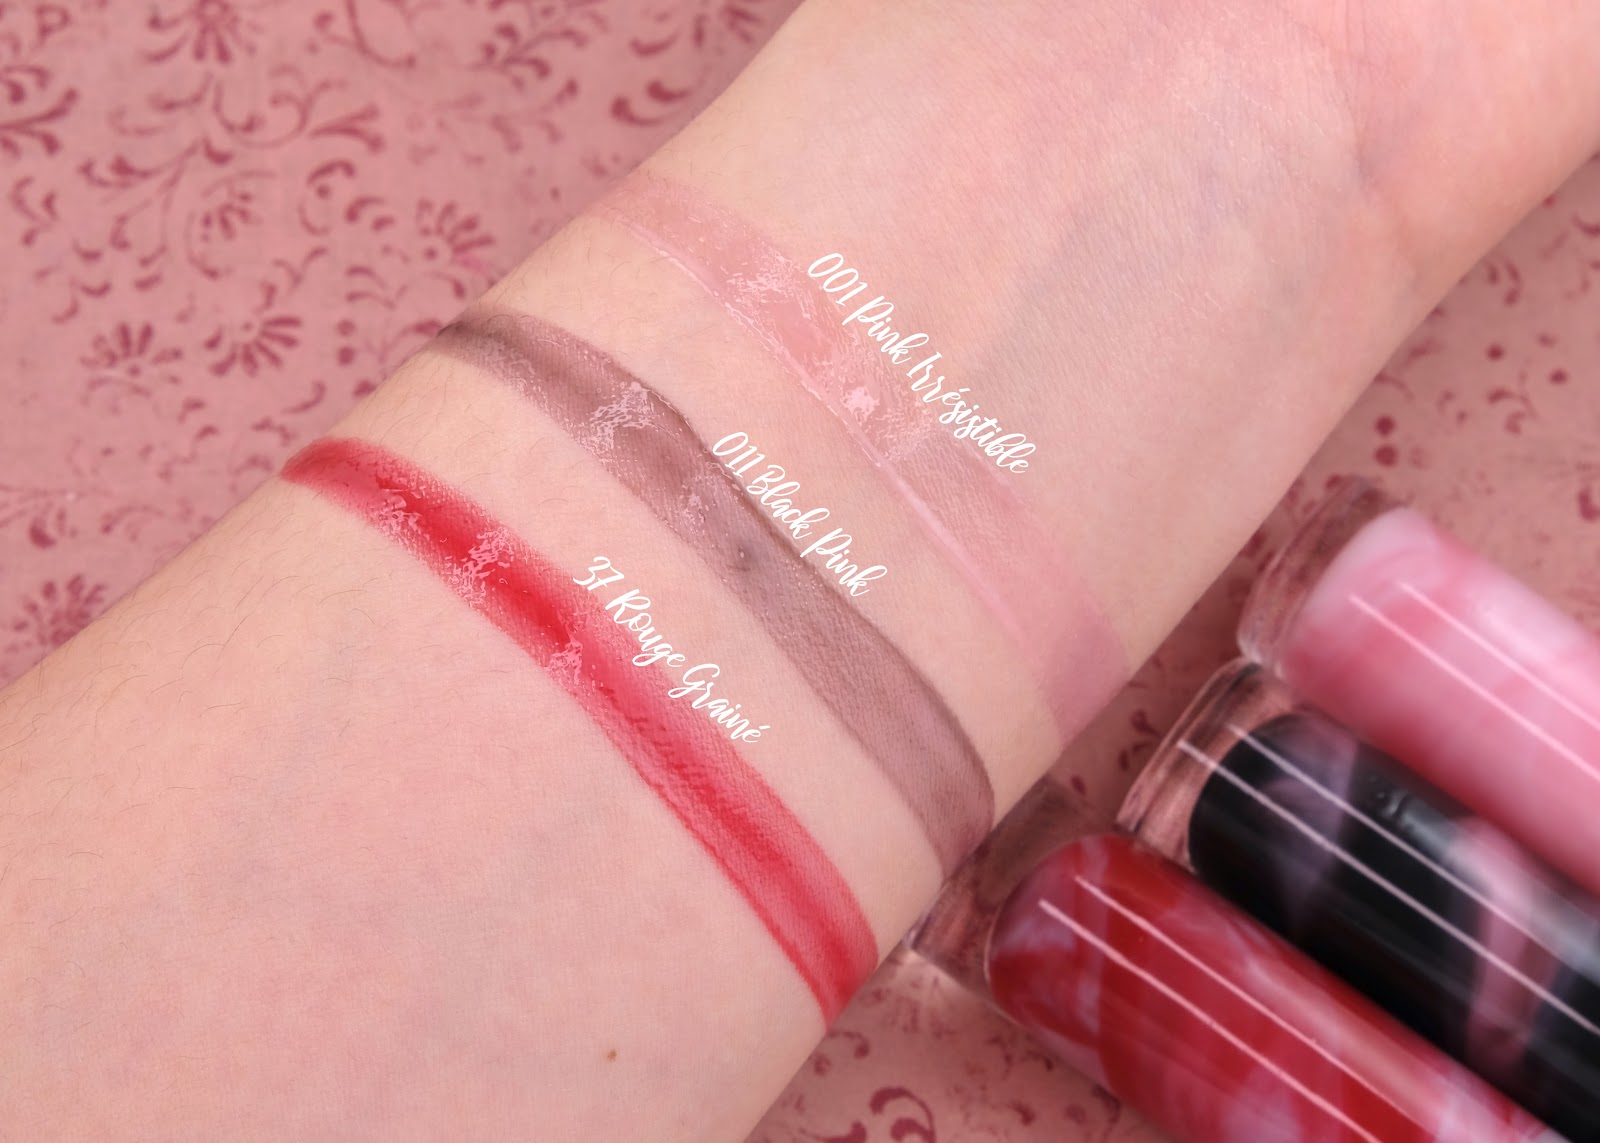 Givenchy | Rose Perfecto Liquid Balm: Review and Swatches